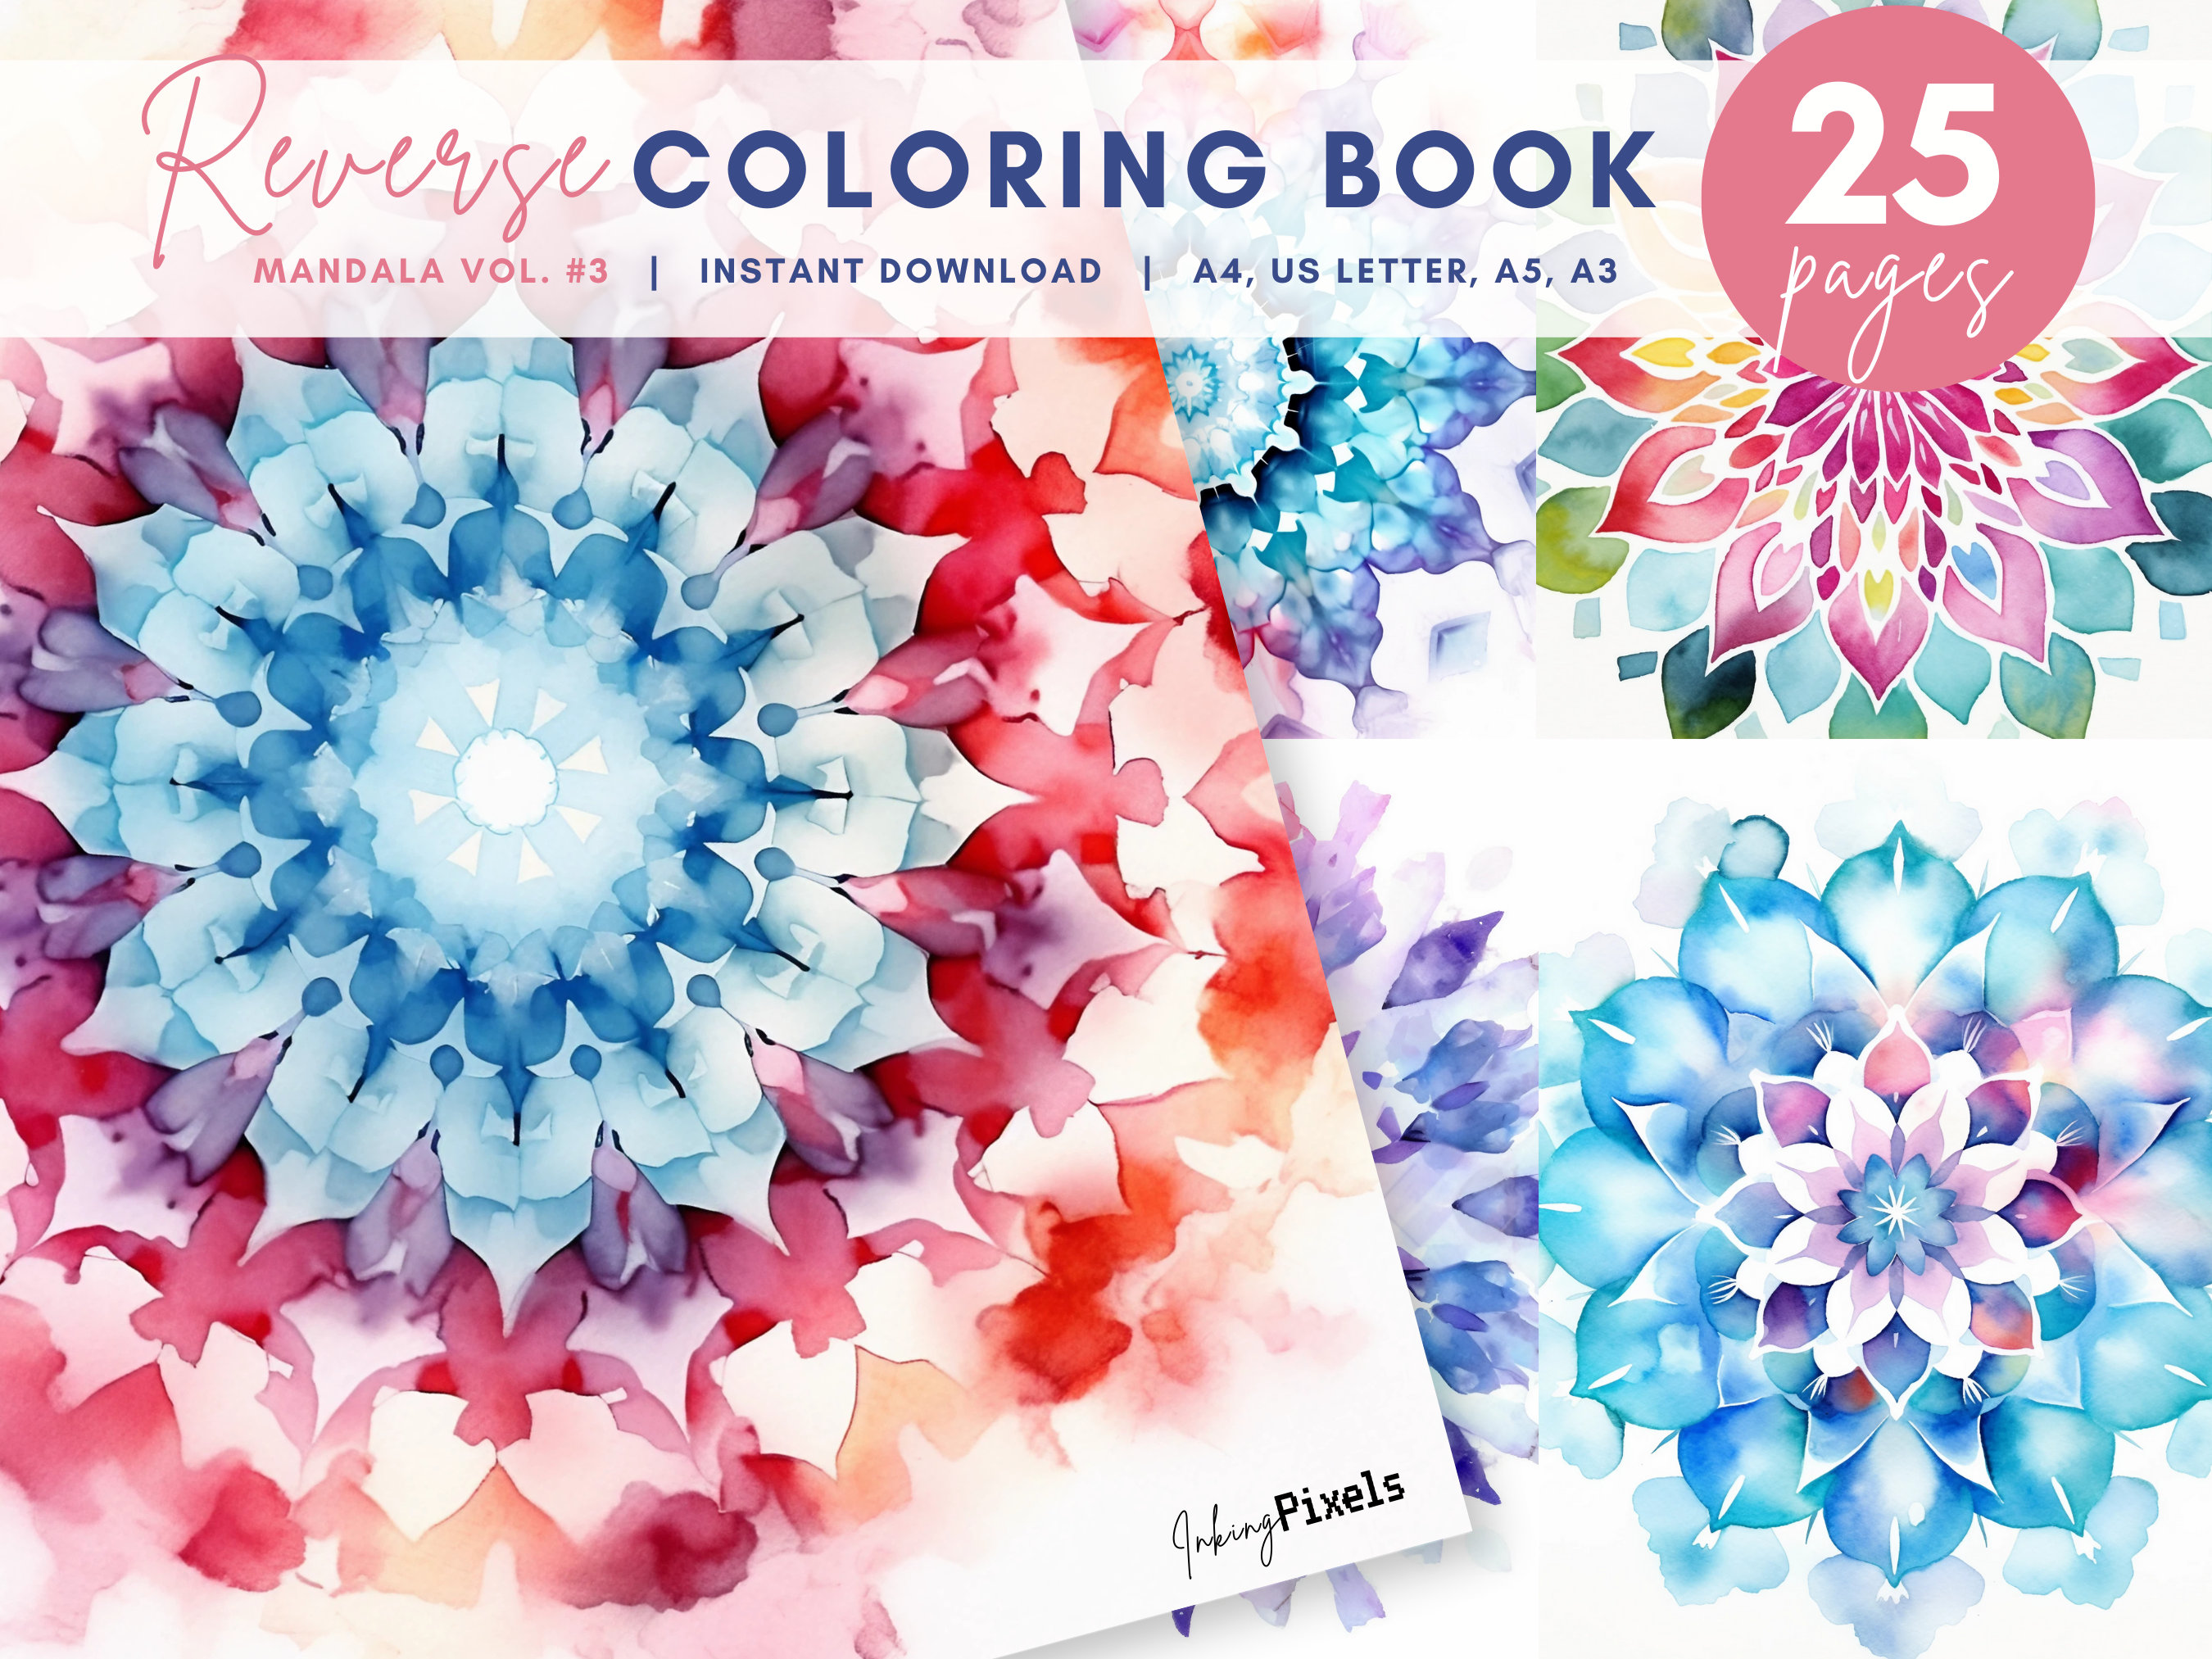 Reverse Coloring Book, 5 Reverse Abstract Coloring Pages for